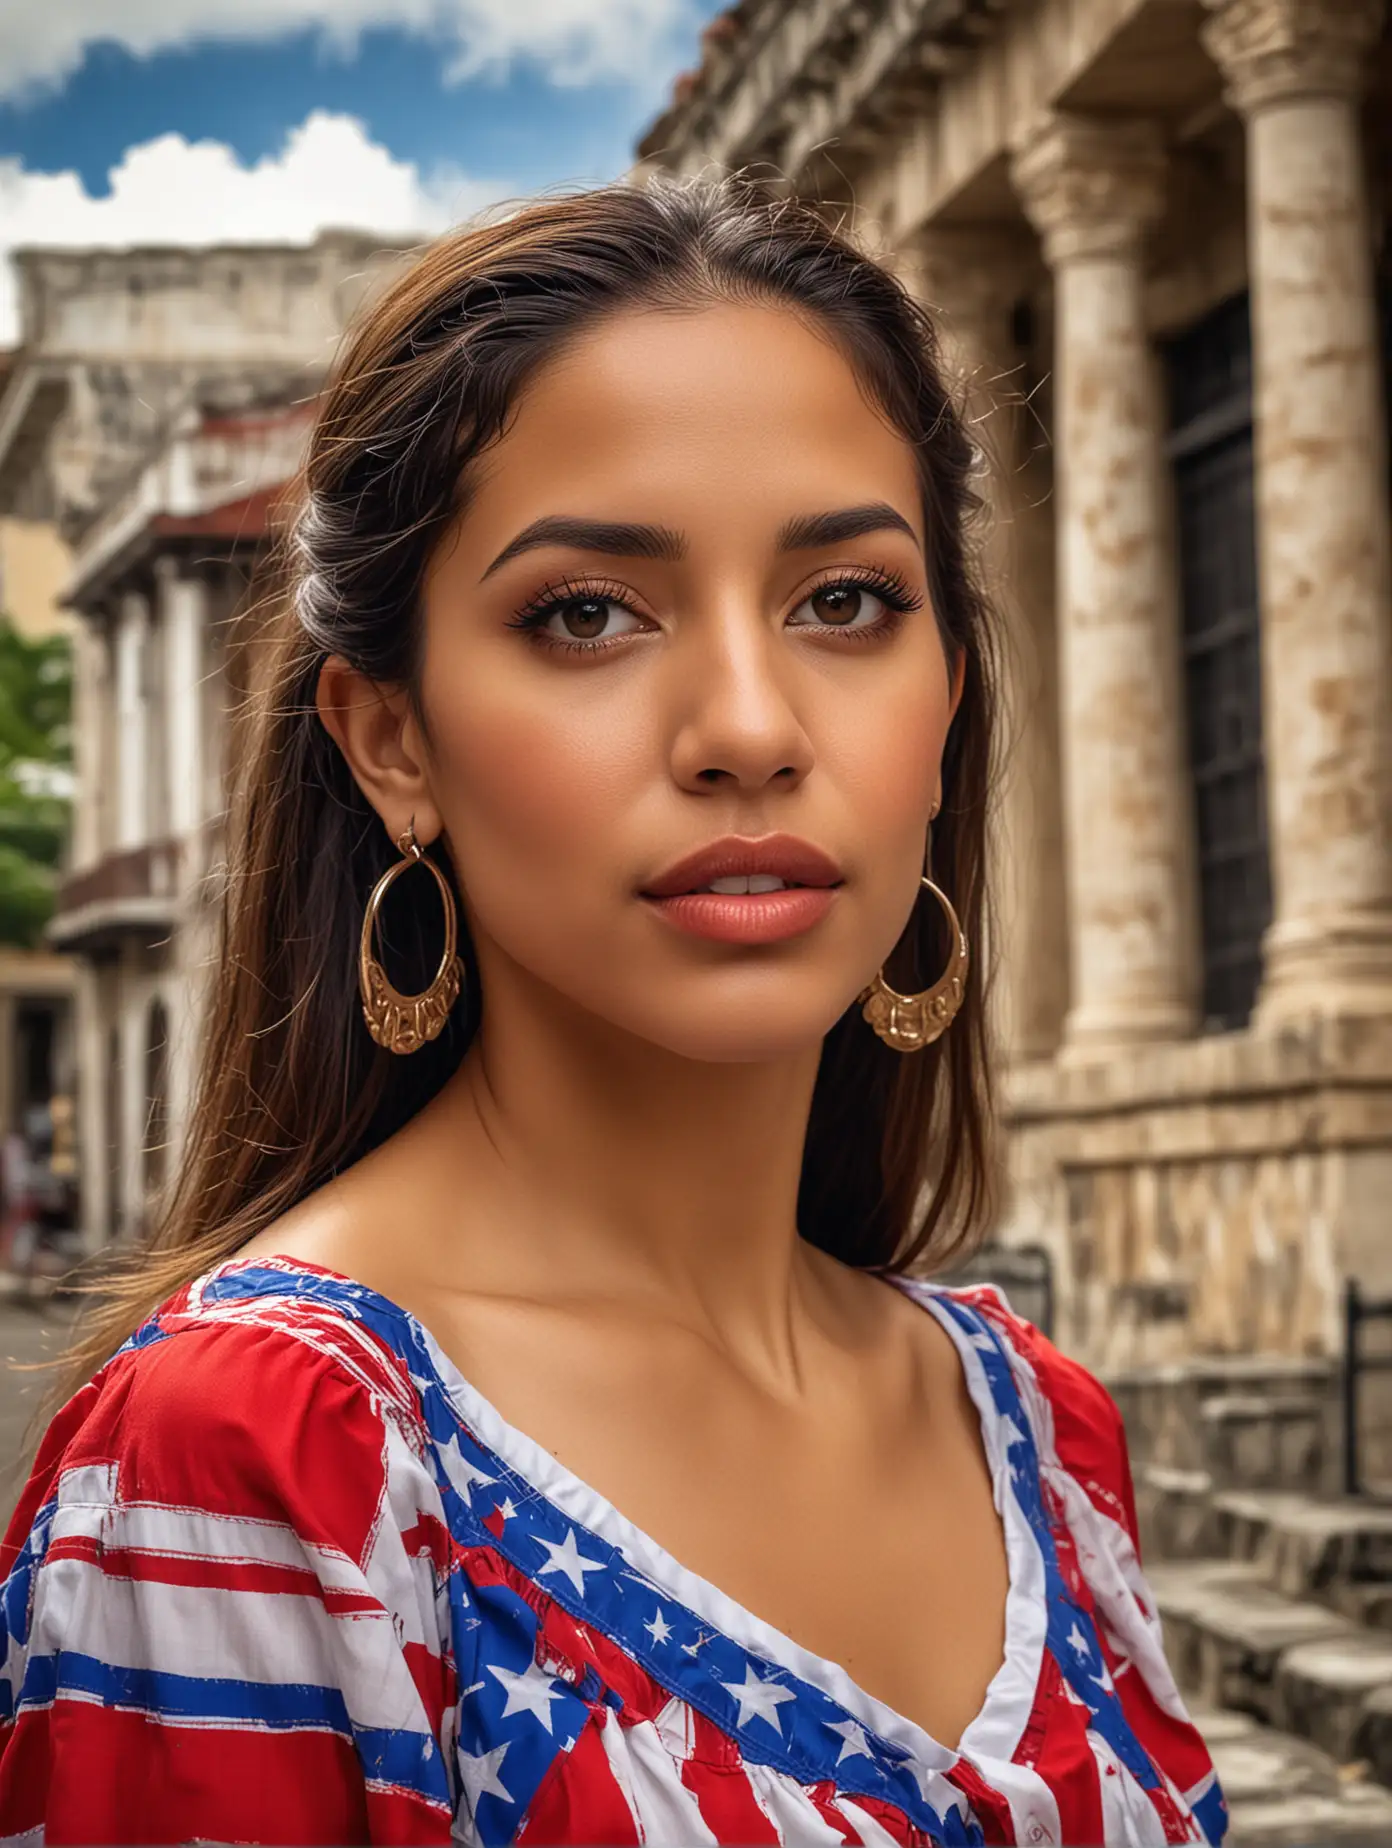 Elegant Puerto Rican Woman in Traditional Dress Against Iconic Puerto Rican Architecture